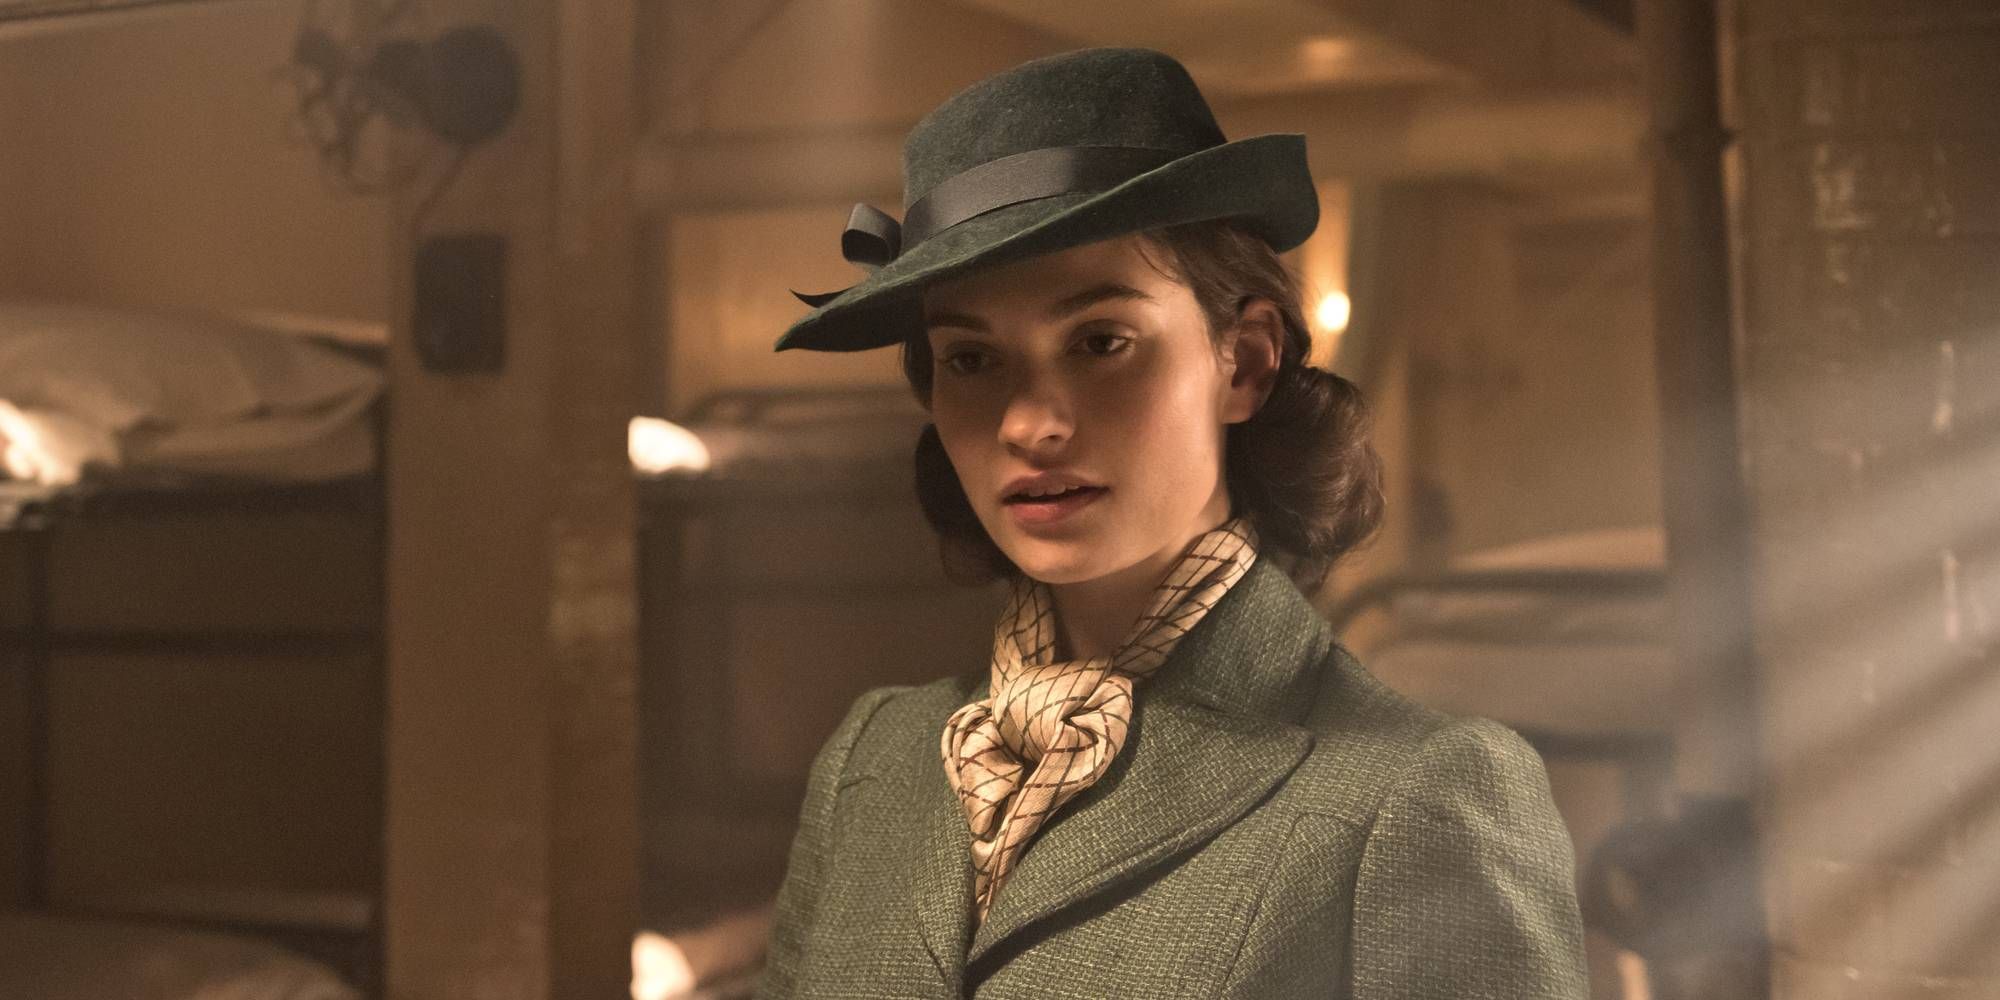 Lily James as Elizabeth Layton, wearing a hat and standing in a dimly lit room in Darkest Hour